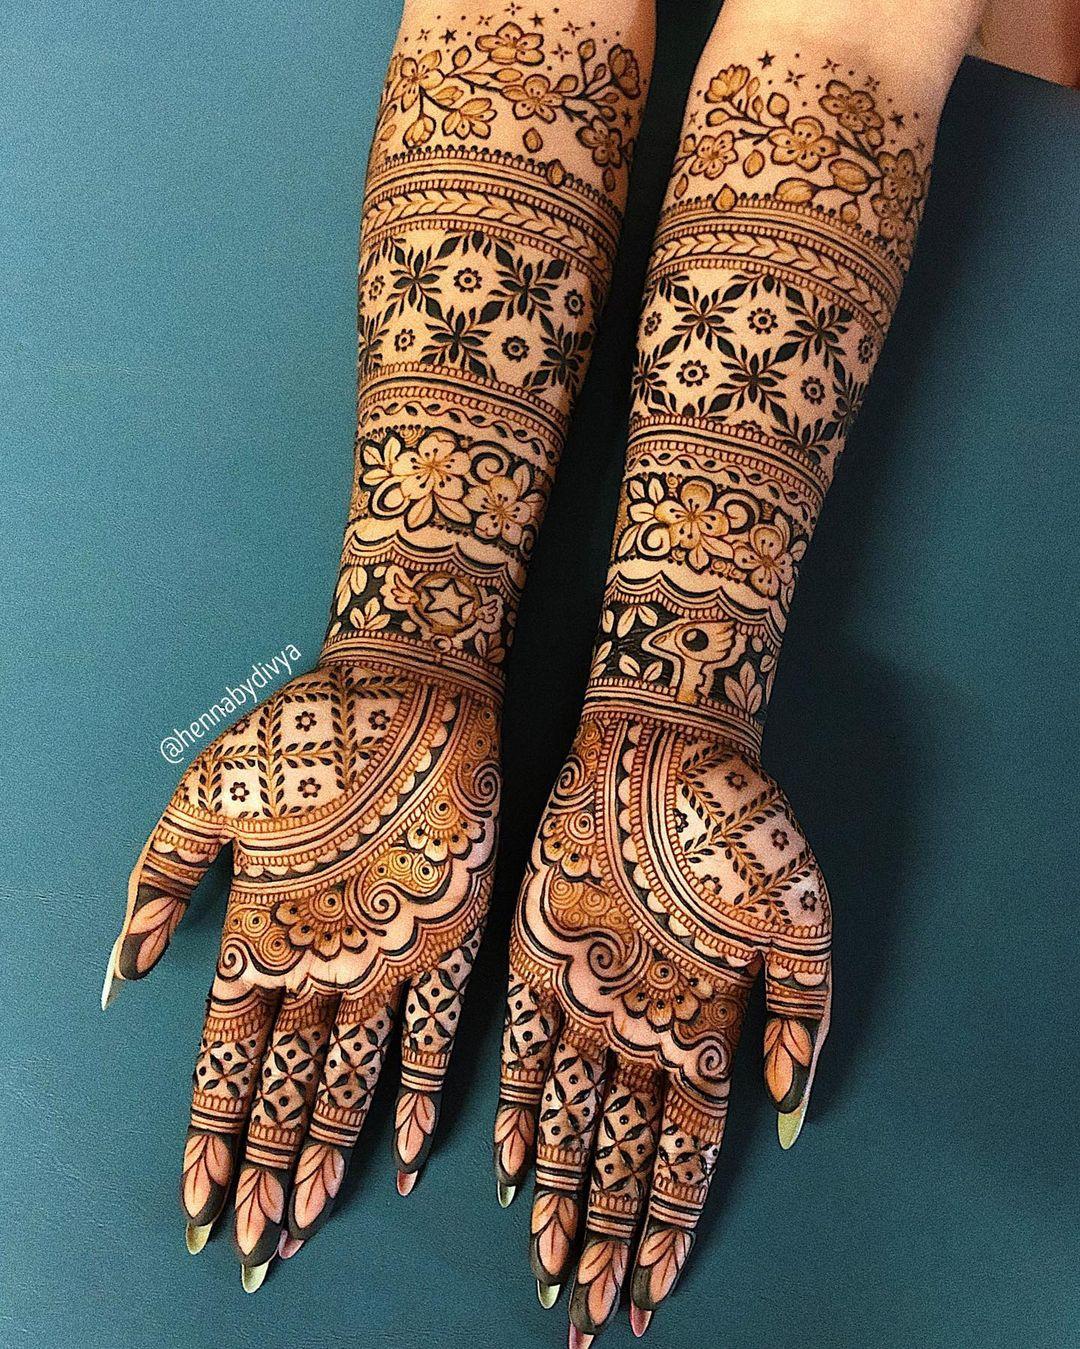 Latest 50 Karwa Chauth Mehndi Designs For Hands - Tips and Beauty-sonthuy.vn